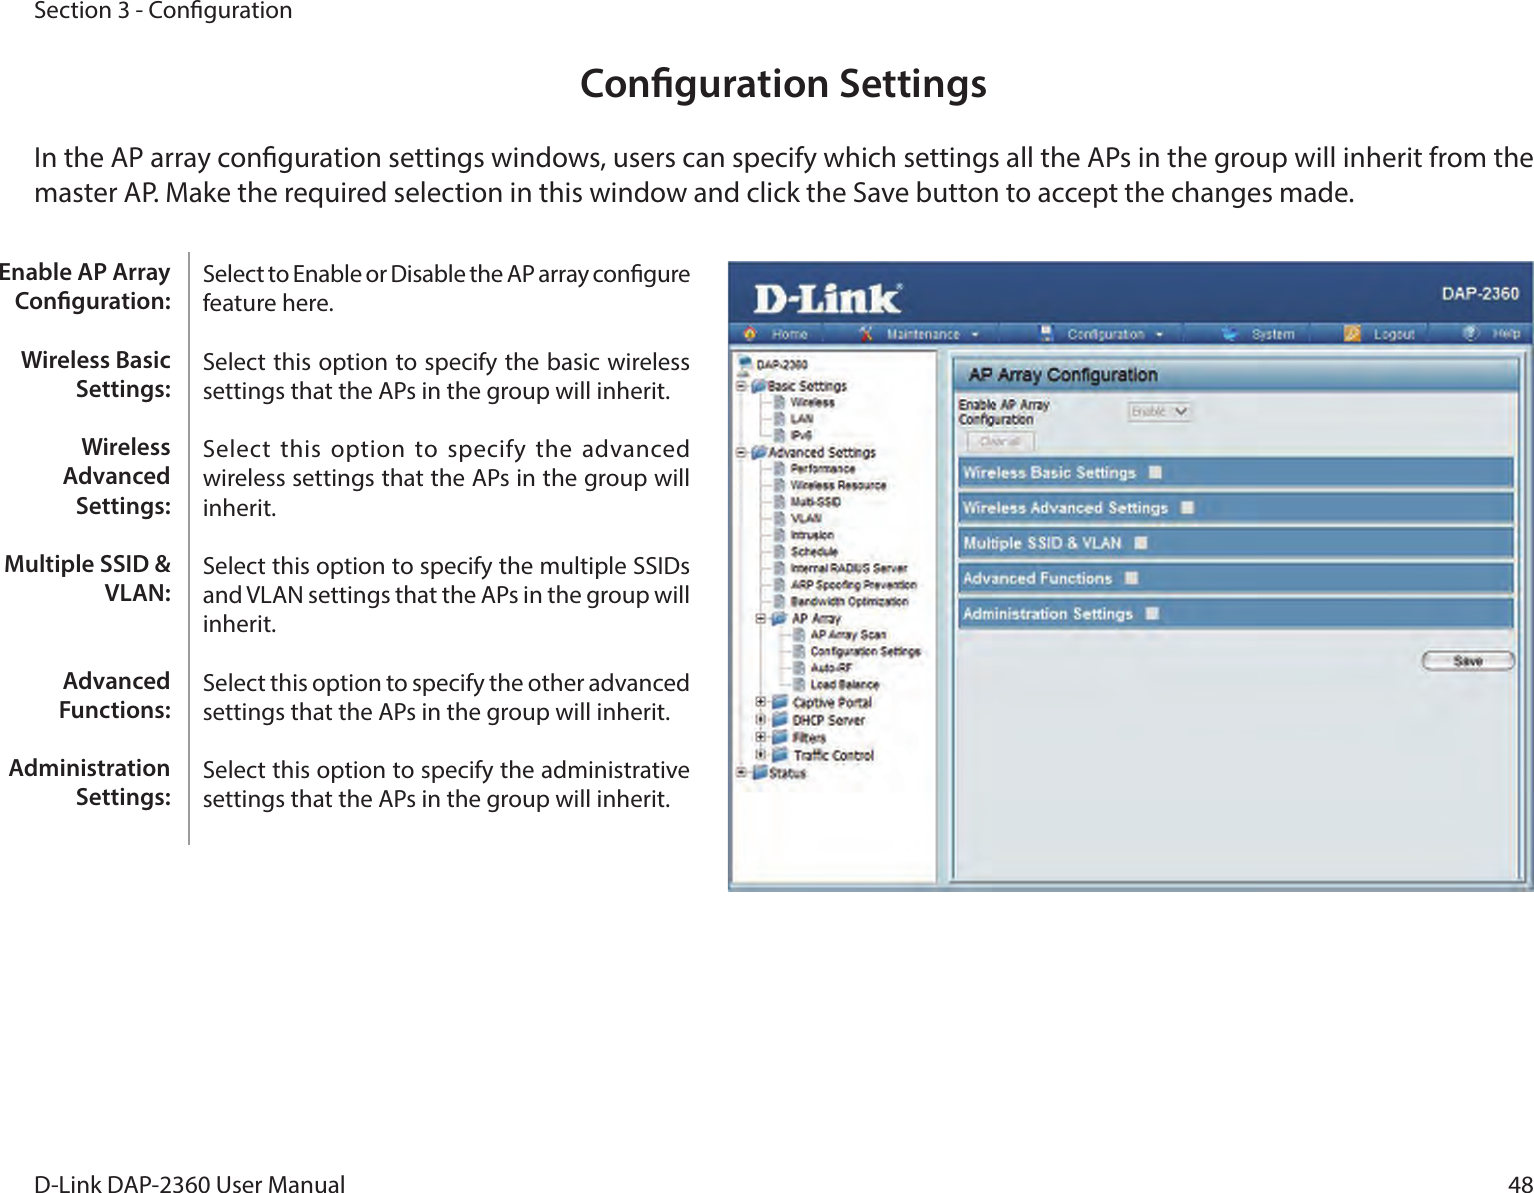 48D-Link DAP-2360 User ManualSection 3 - CongurationConguration SettingsIn the AP array conguration settings windows, users can specify which settings all the APs in the group will inherit from the master AP. Make the required selection in this window and click the Save button to accept the changes made.Select to Enable or Disable the AP array congure feature here.Select this option to specify the basic wireless settings that the APs in the group will inherit.Select  this option  to specify the  advanced wireless settings that the APs in the group will inherit.Select this option to specify the multiple SSIDs and VLAN settings that the APs in the group will inherit.Select this option to specify the other advanced settings that the APs in the group will inherit.Select this option to specify the administrative settings that the APs in the group will inherit.Enable AP Array Conguration:Wireless Basic Settings:Wireless Advanced Settings:Multiple SSID &amp; VLAN:Advanced Functions:Administration Settings: